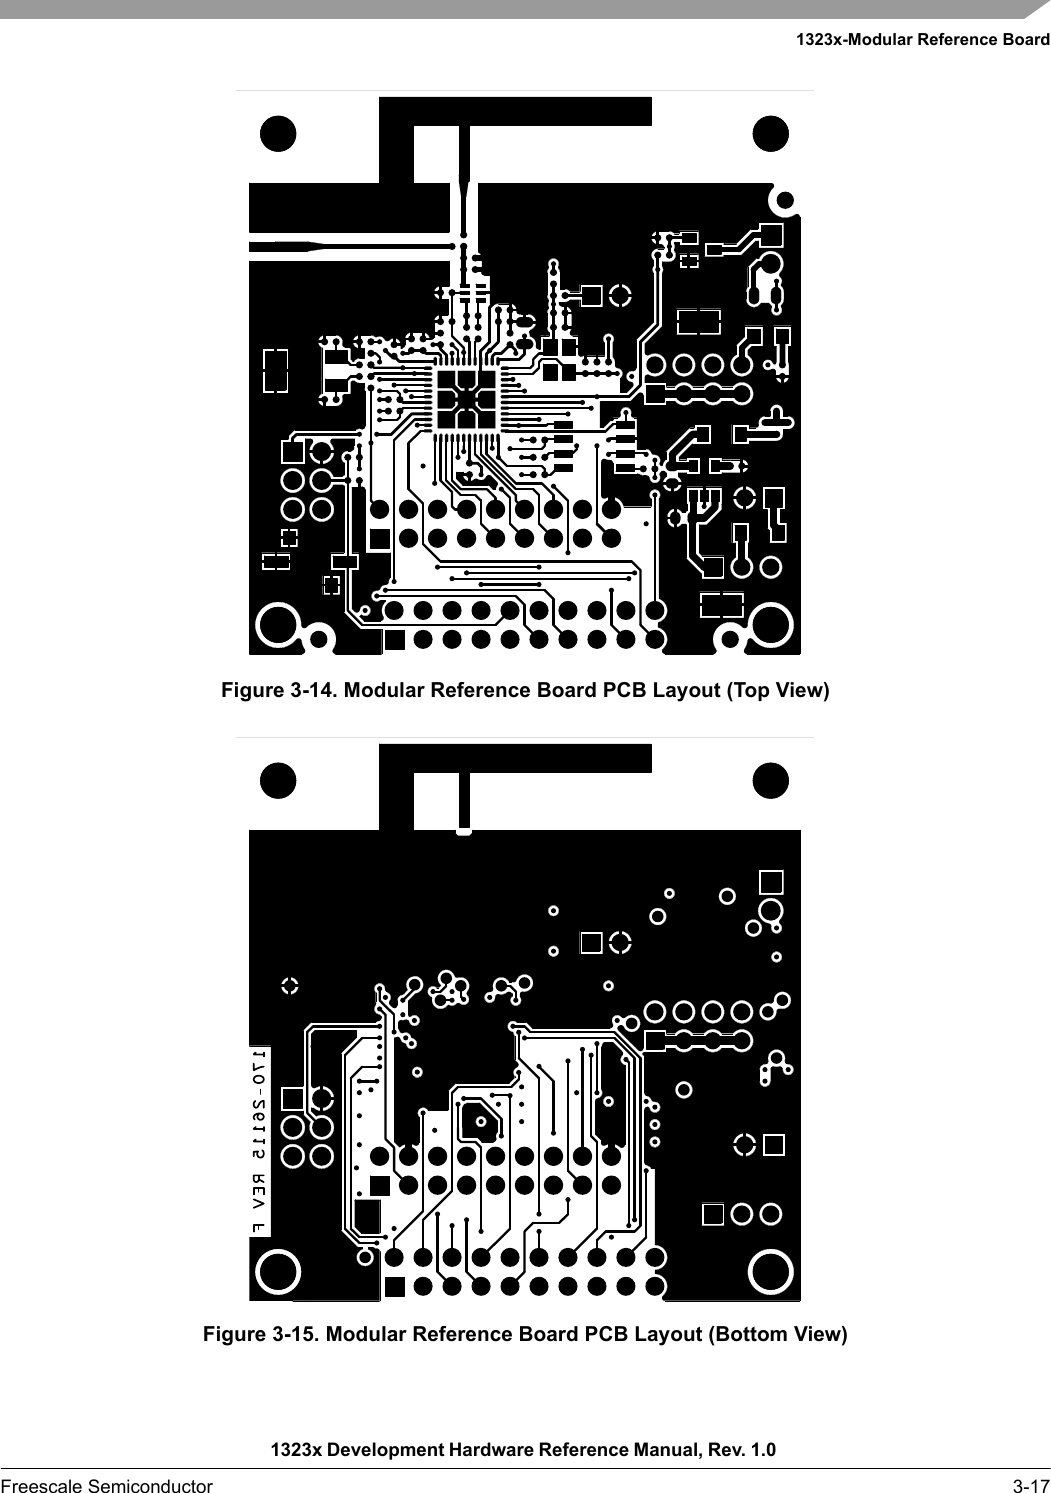 1323x-Modular Reference Board1323x Development Hardware Reference Manual, Rev. 1.0 Freescale Semiconductor 3-17Figure 3-14. Modular Reference Board PCB Layout (Top View)Figure 3-15. Modular Reference Board PCB Layout (Bottom View)